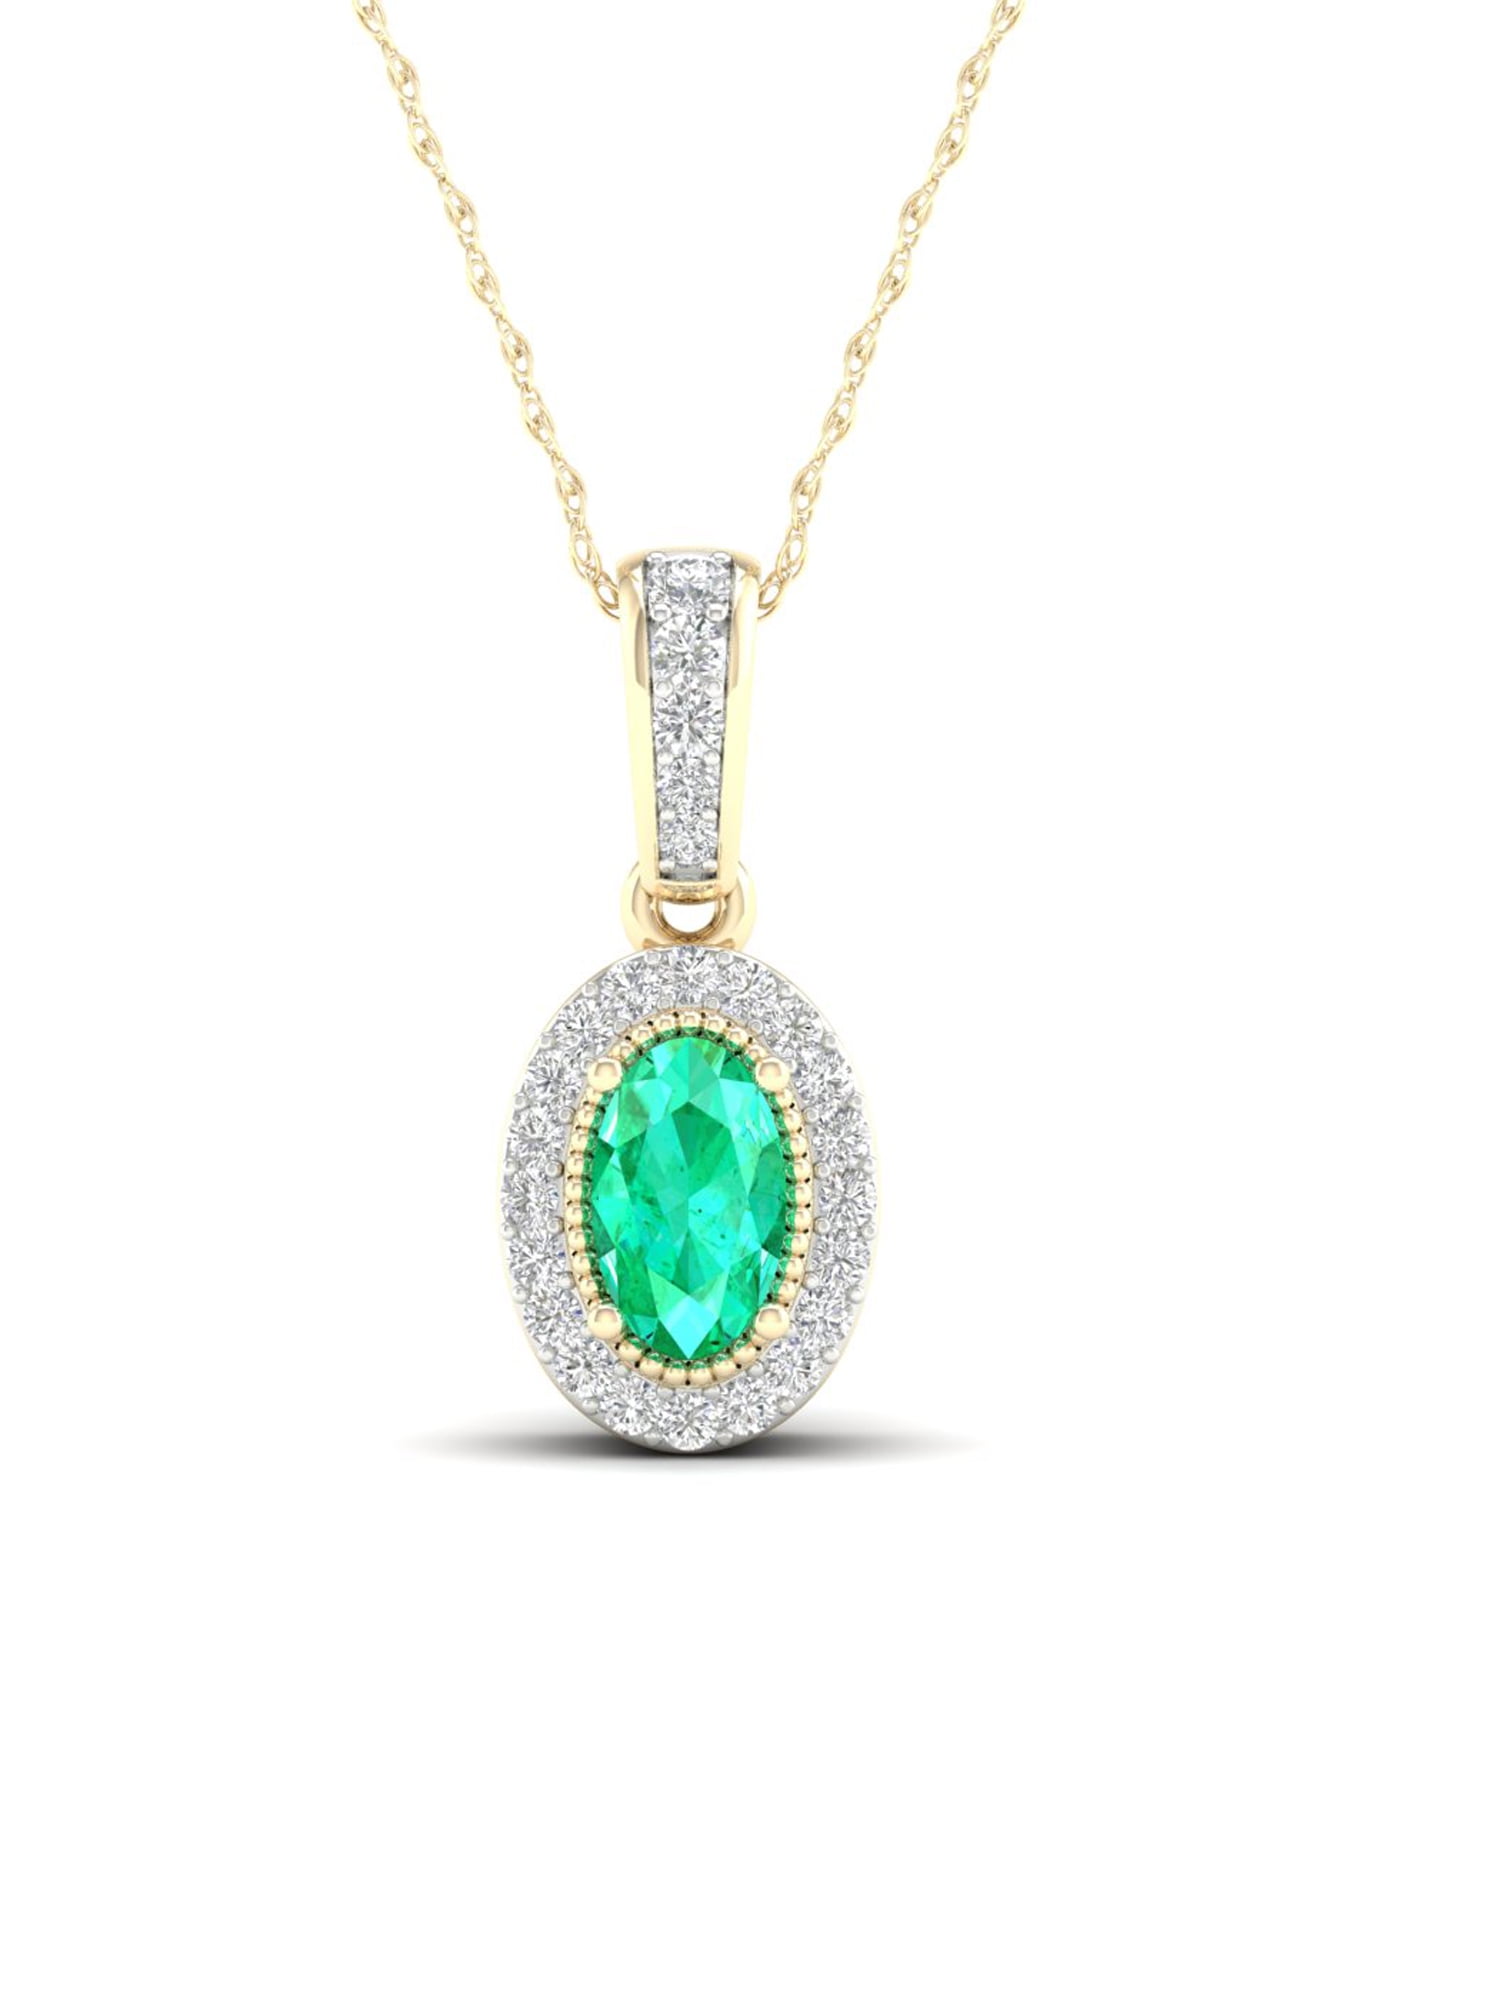 Details about   1.52 Ct 10x7mm Gemstone & Real Diamond 10K Yellow Gold Halo Pendant Necklace